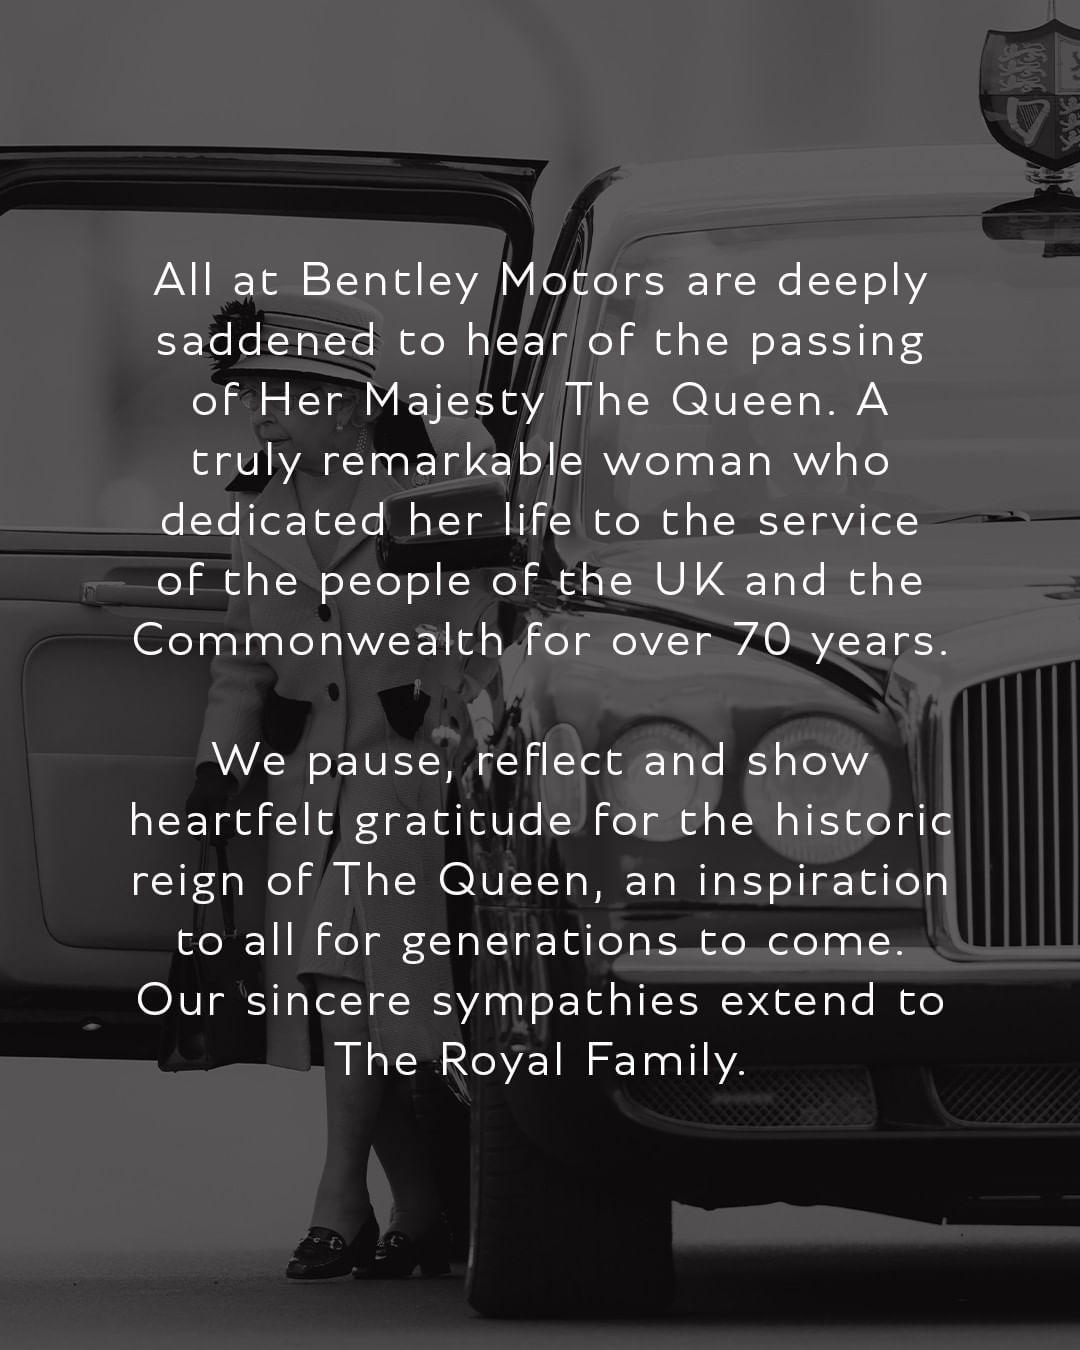 image  1 Bentley Motors - All at Bentley Motors are deeply saddened to hear of the passing of Her Majesty The